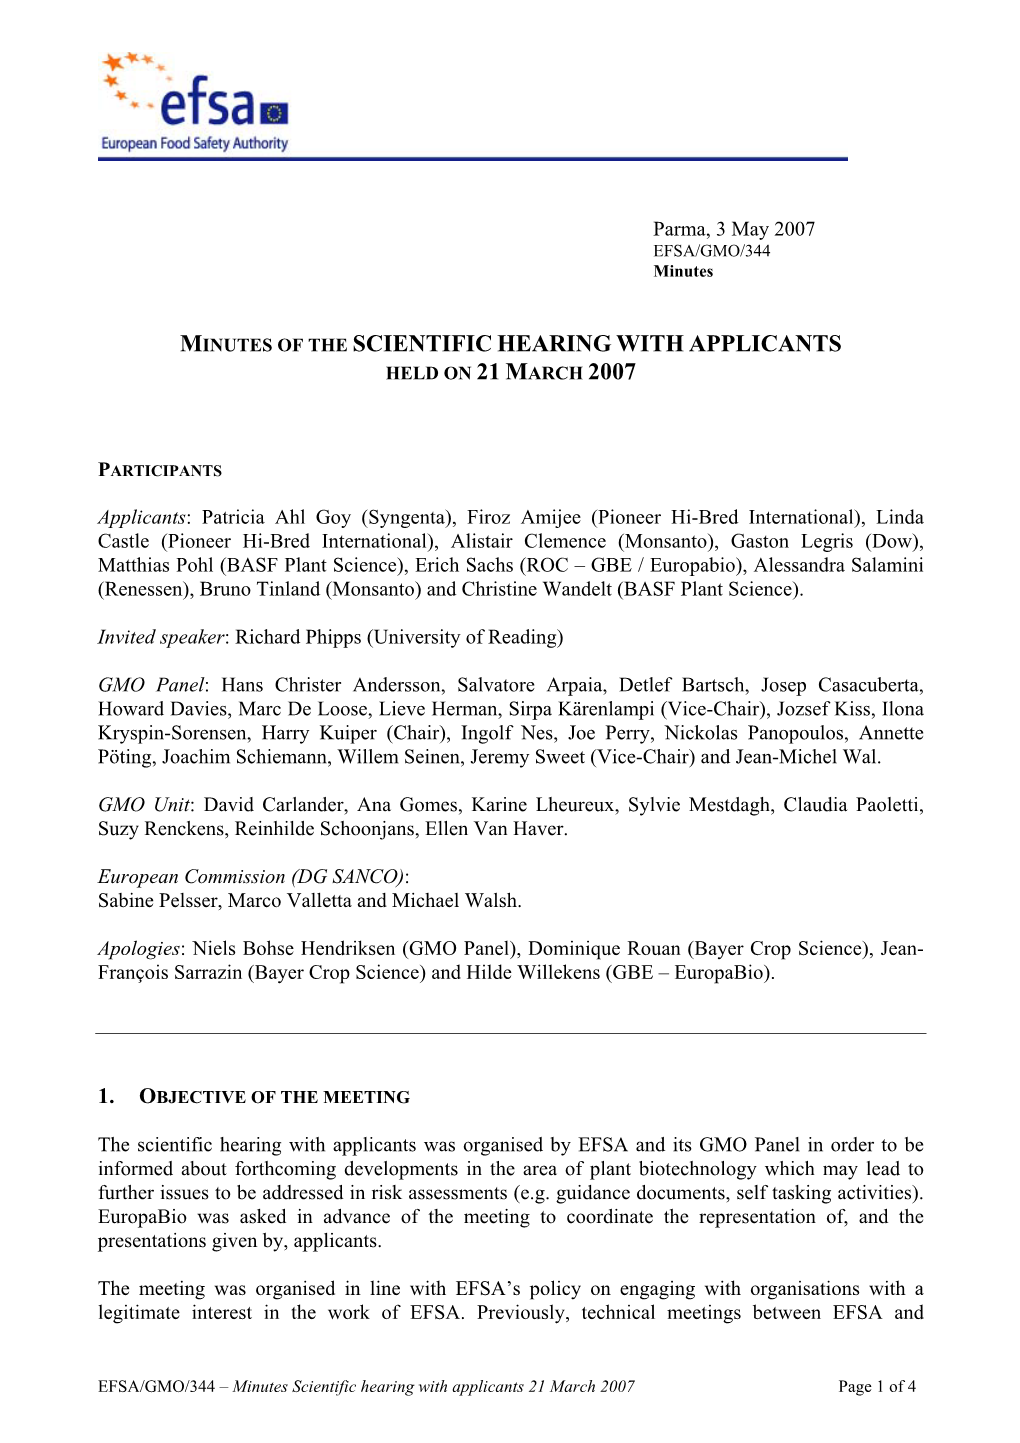 Minutes of the Scientific Hearing with Applicants Held on 21 March 2007